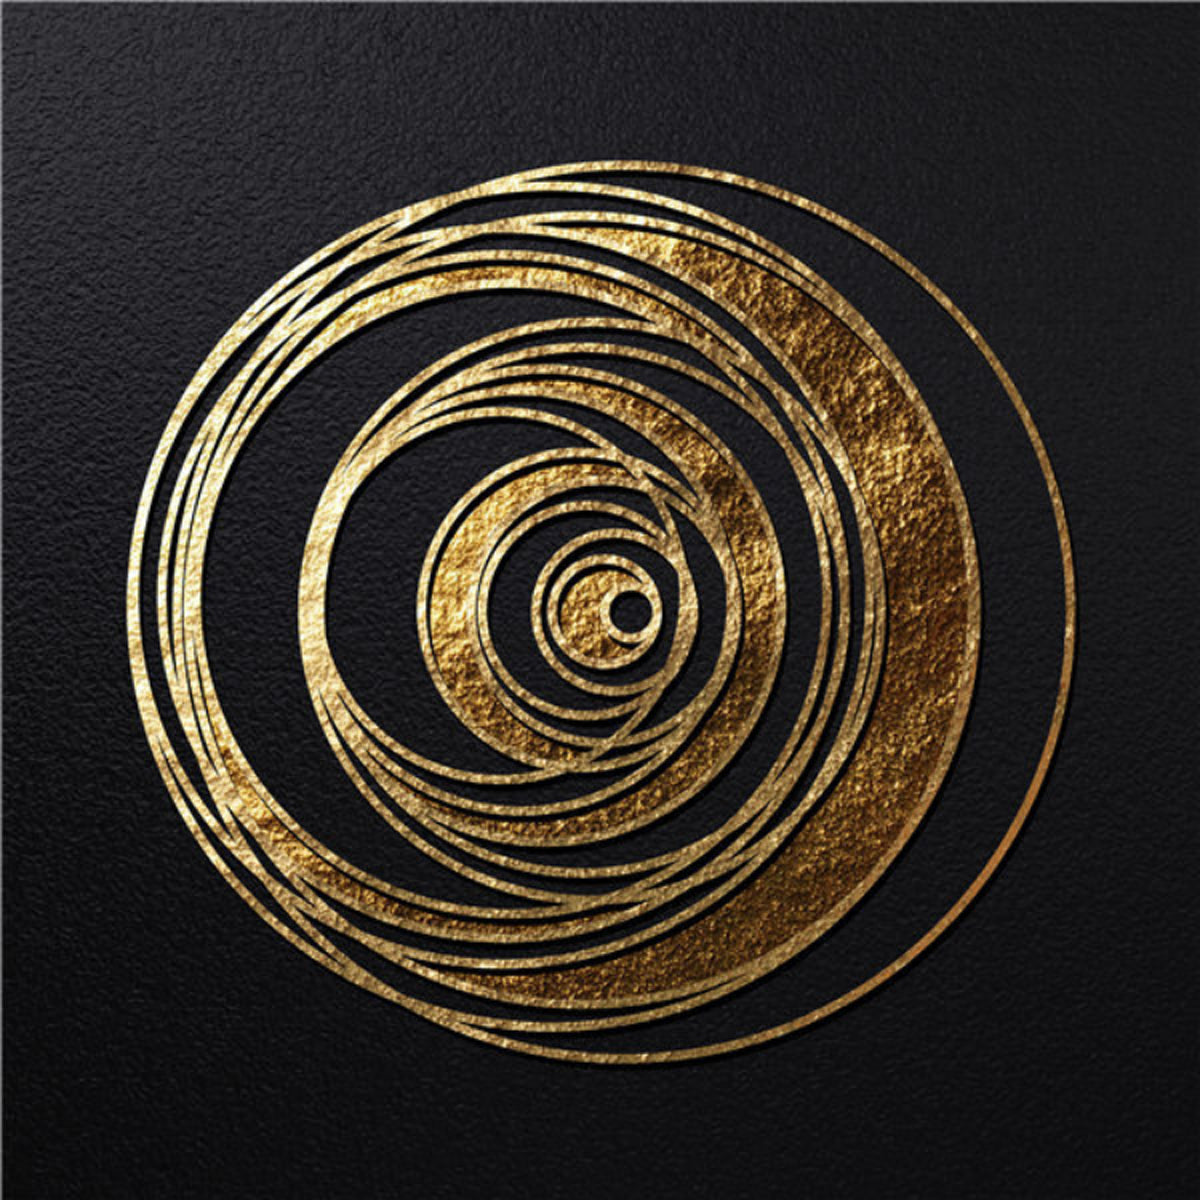 black 5 gold si – on print in Traumpreisfabrik motifs art 6 TPFLiving canvas / abstract /